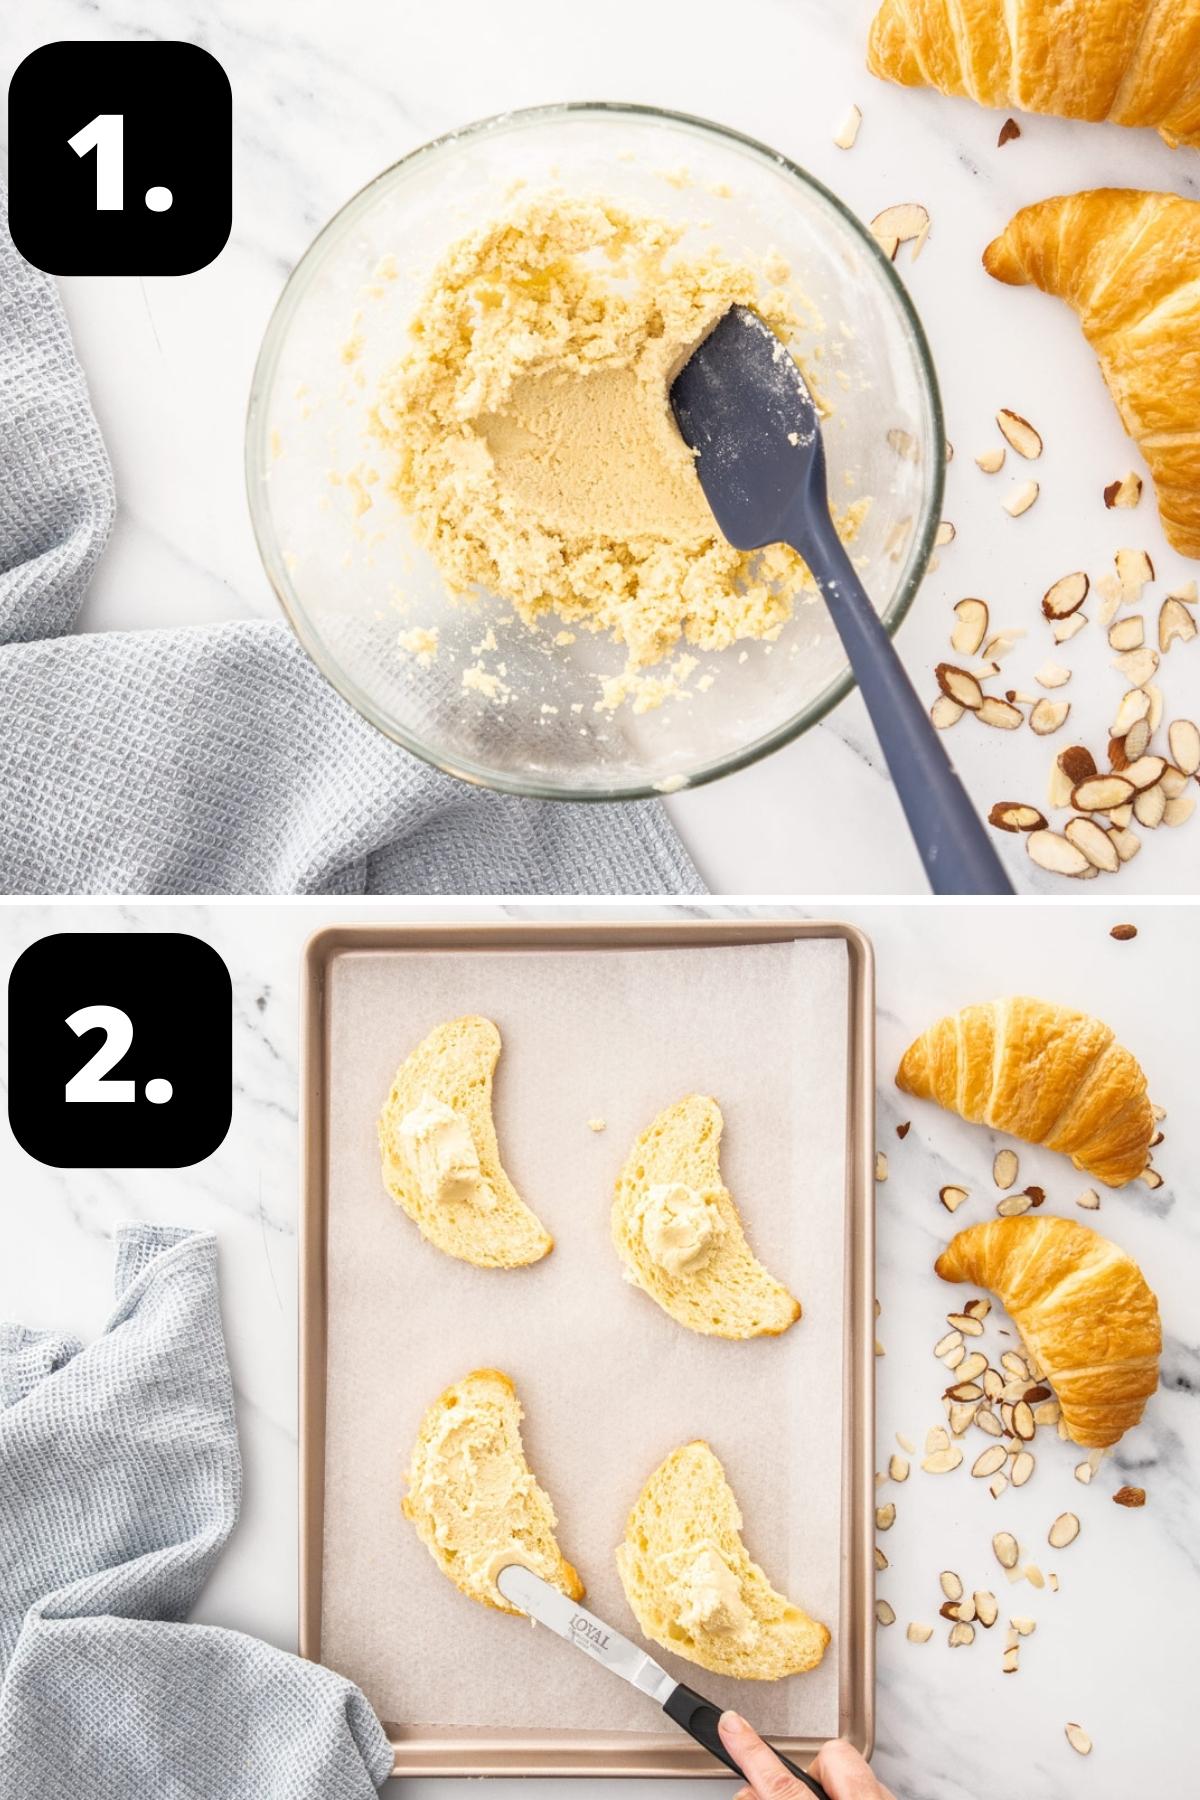 Steps 1-2 of preparing this recipe - making the almond filling and spreading croissant halves with the almond filling.